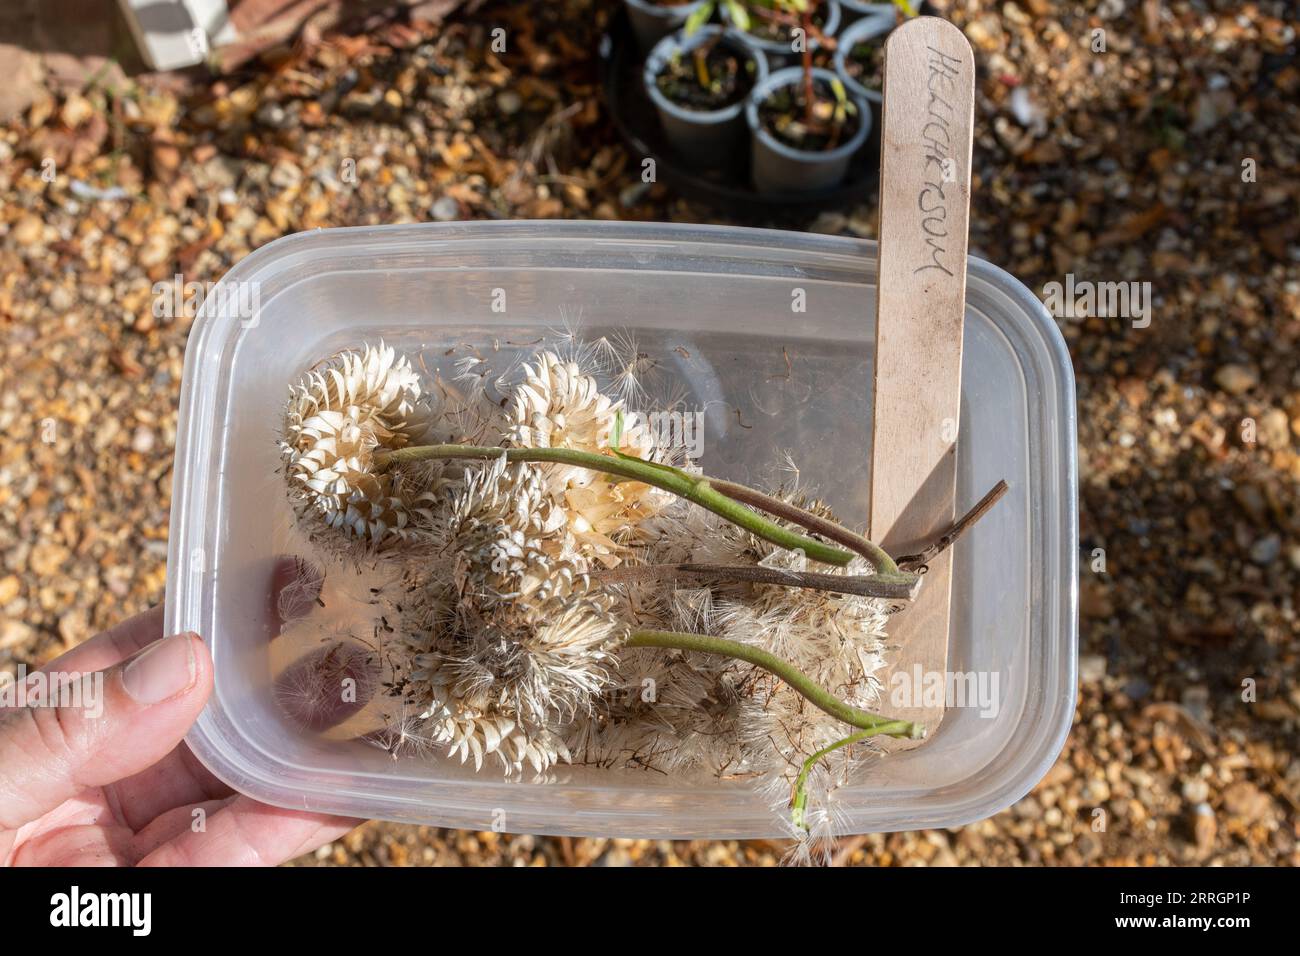 Helichrysum seeds being collected from everlasting flower seed heads in a plastic container to be dried and planted, UK Stock Photo